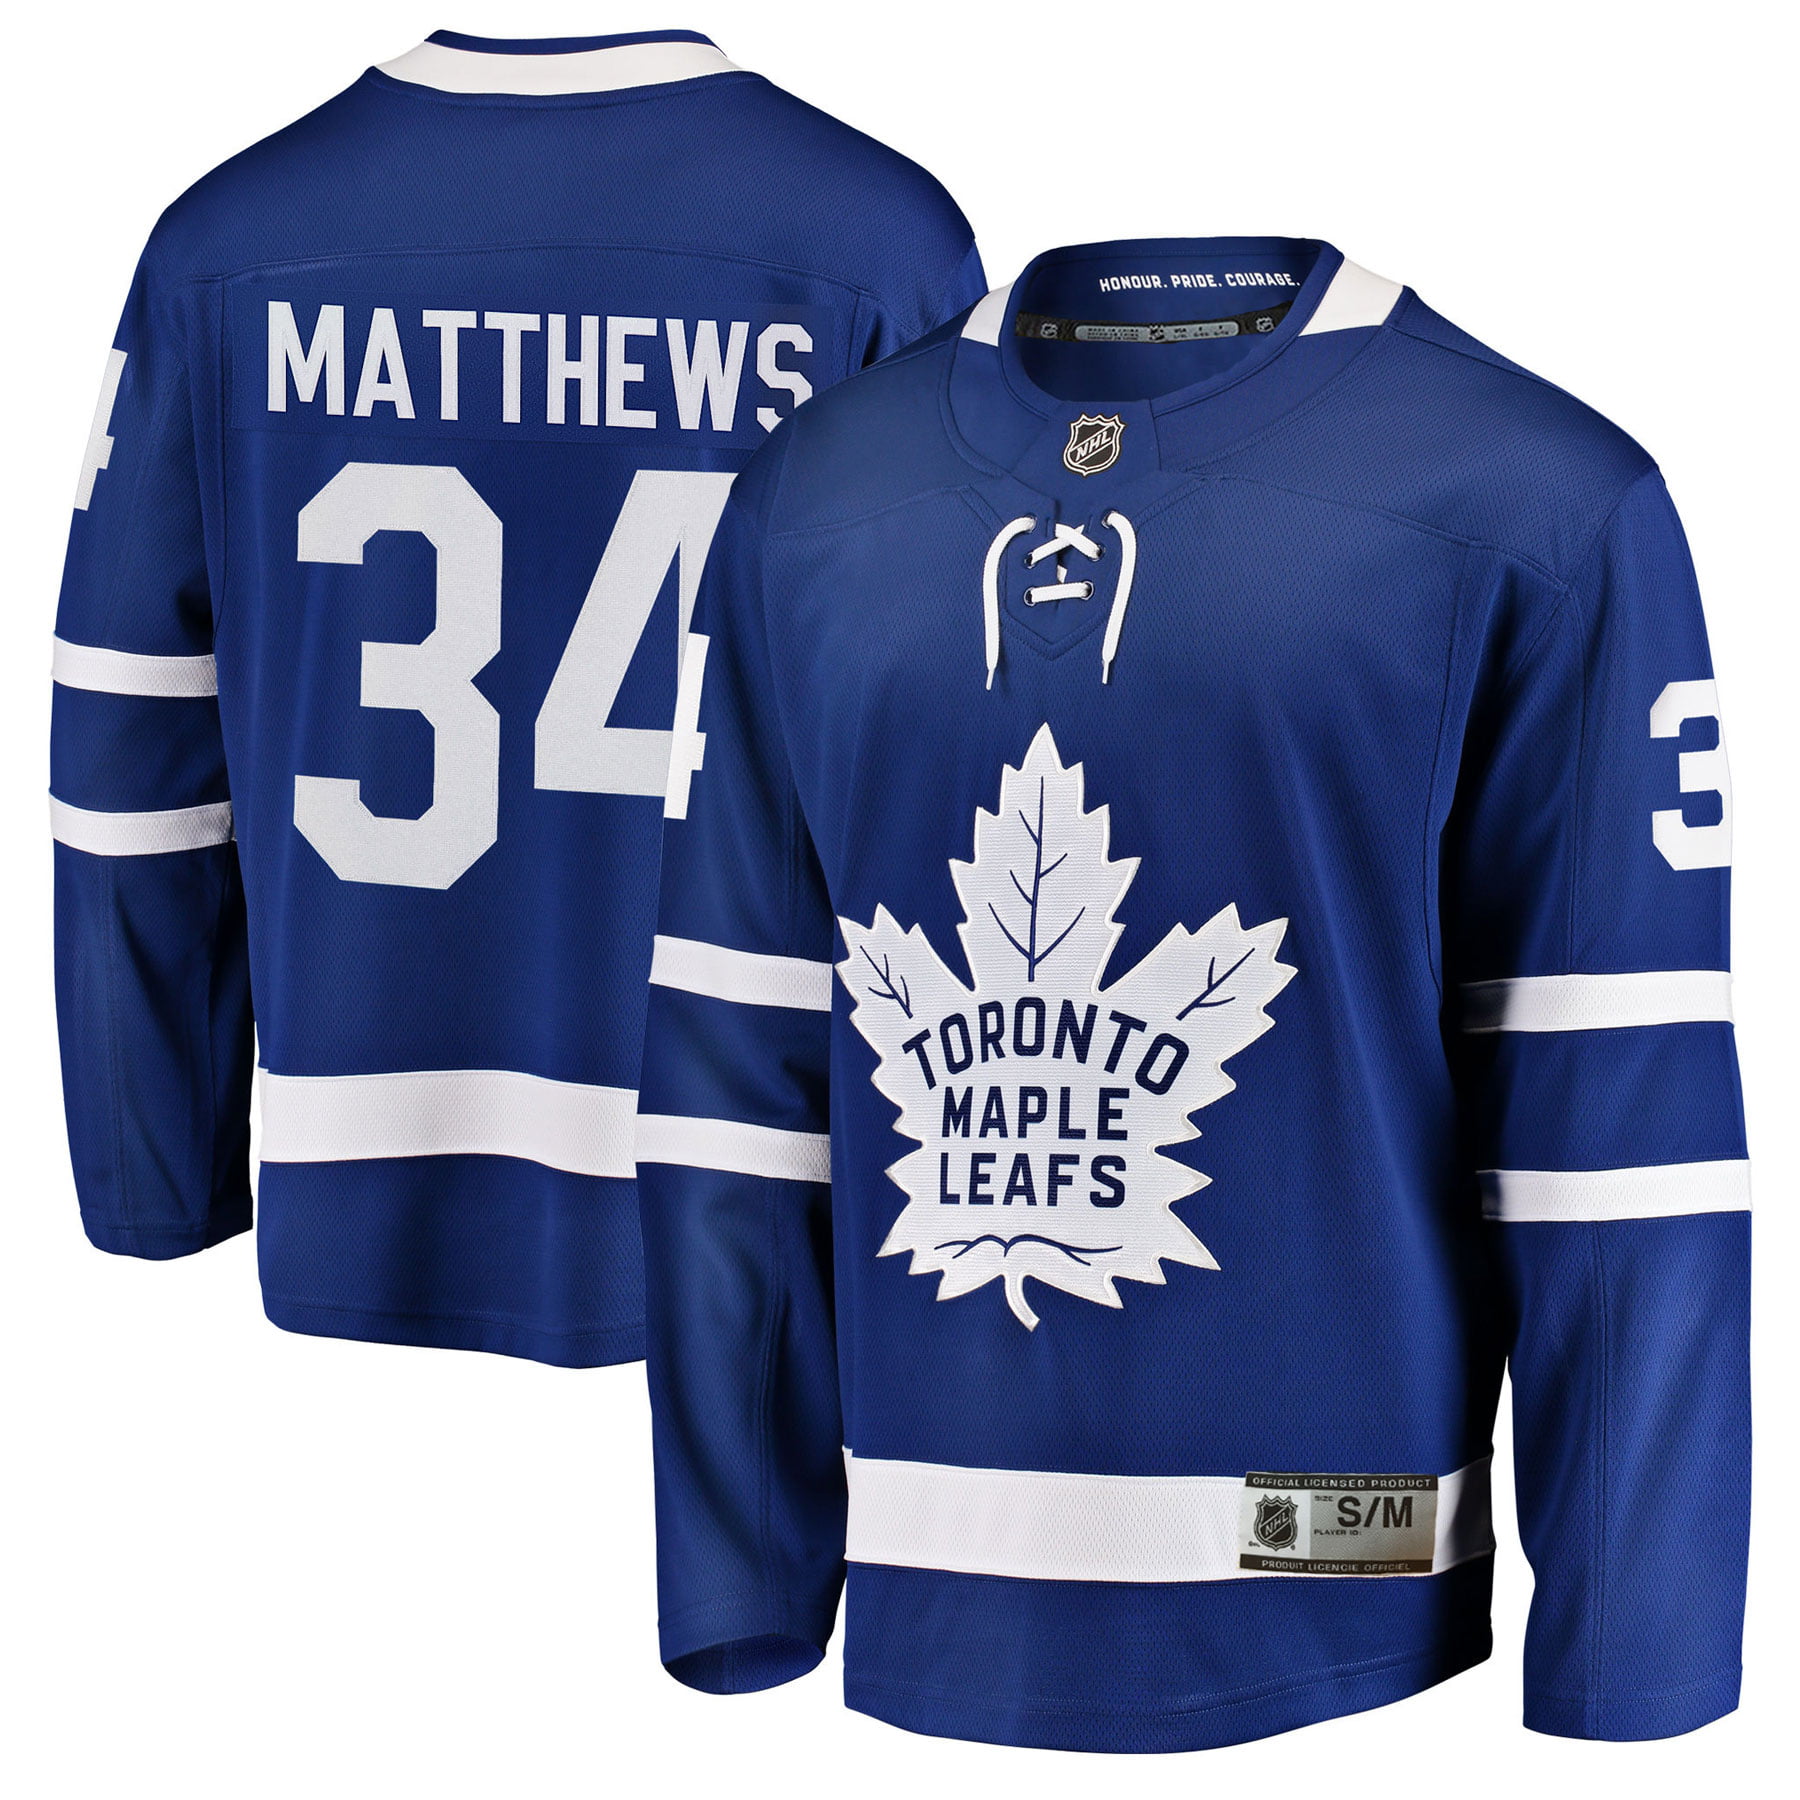 official leafs jersey